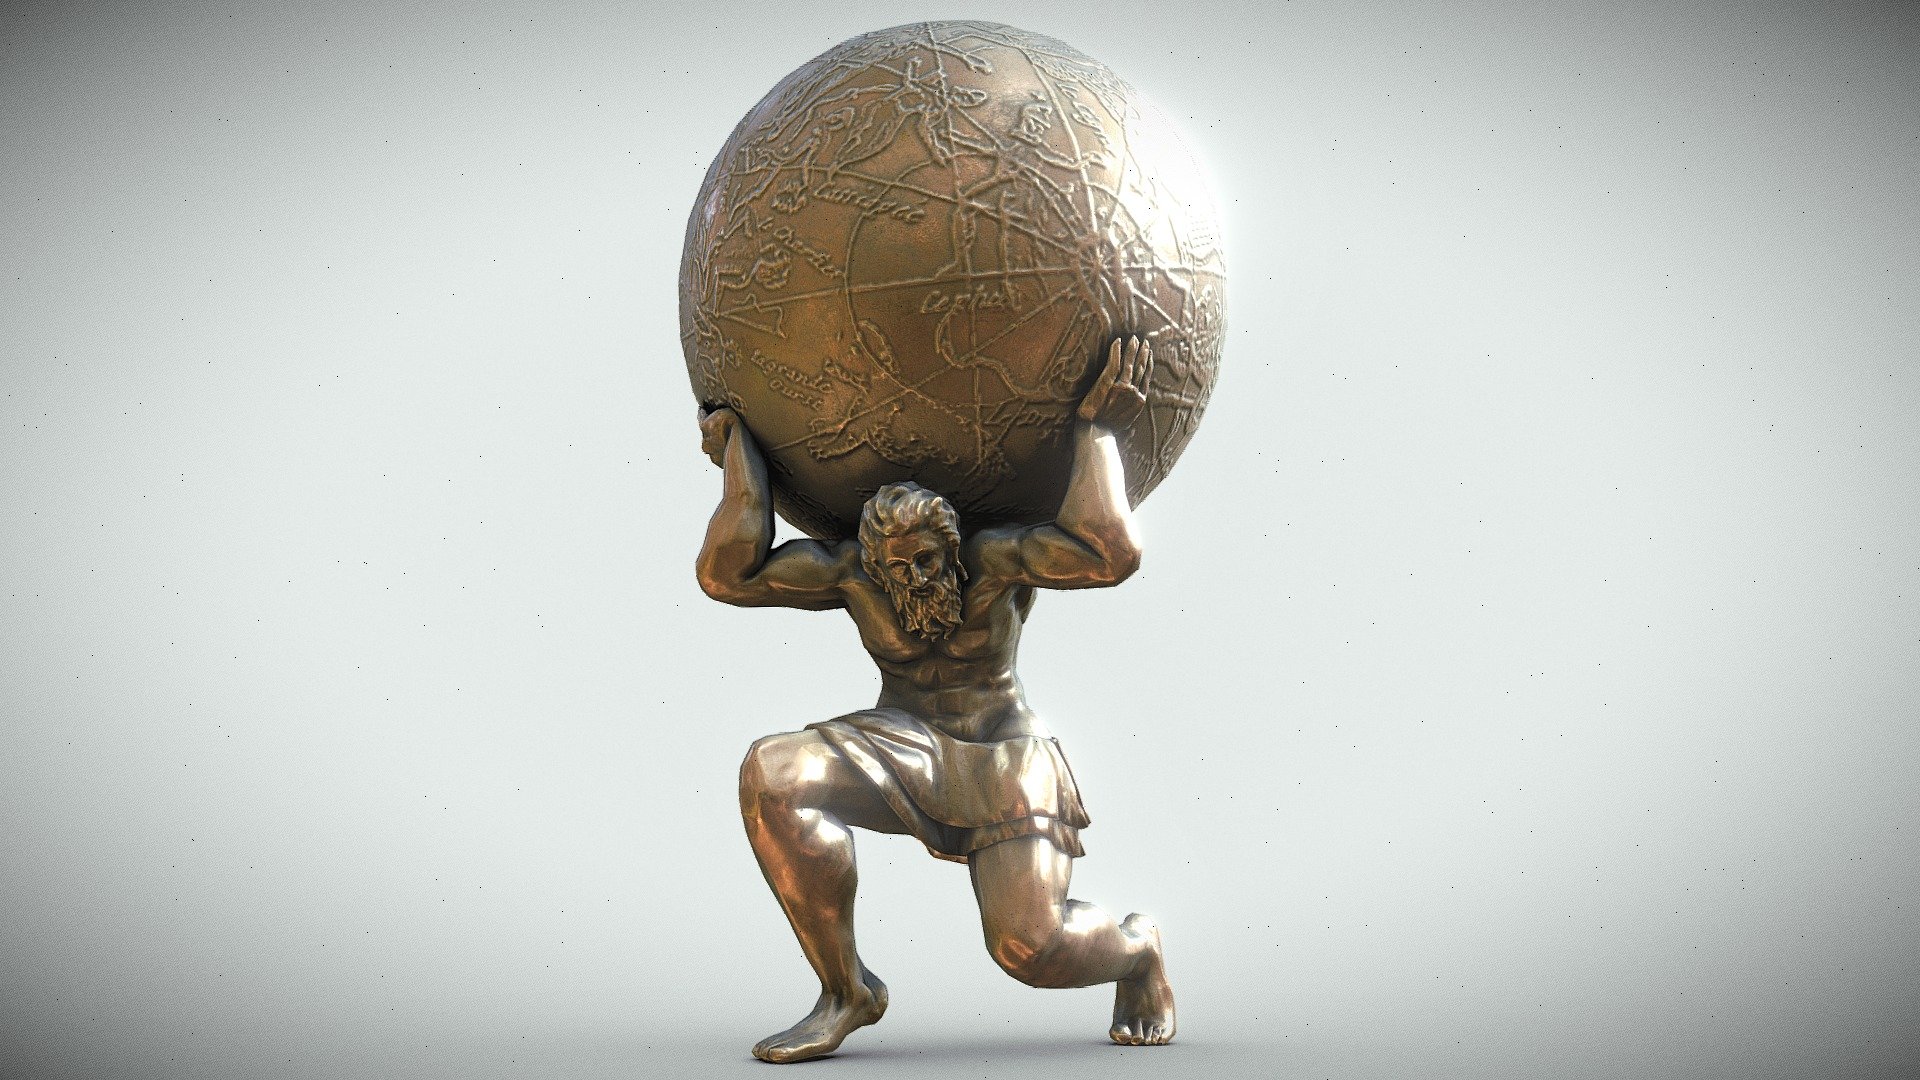 In Greek mythology, Atlas (Greek: Ἄτλας, Átlas) is a Titan condemned to hold up the heavens or sky for eternity after the Titanomachy

Separate materials and objects for the Sphere and the Atlas Body.
Both materials have 4k PBR textures.

Package also includes Marble&amp;Gold and Oxidized Bronze textures 3d model